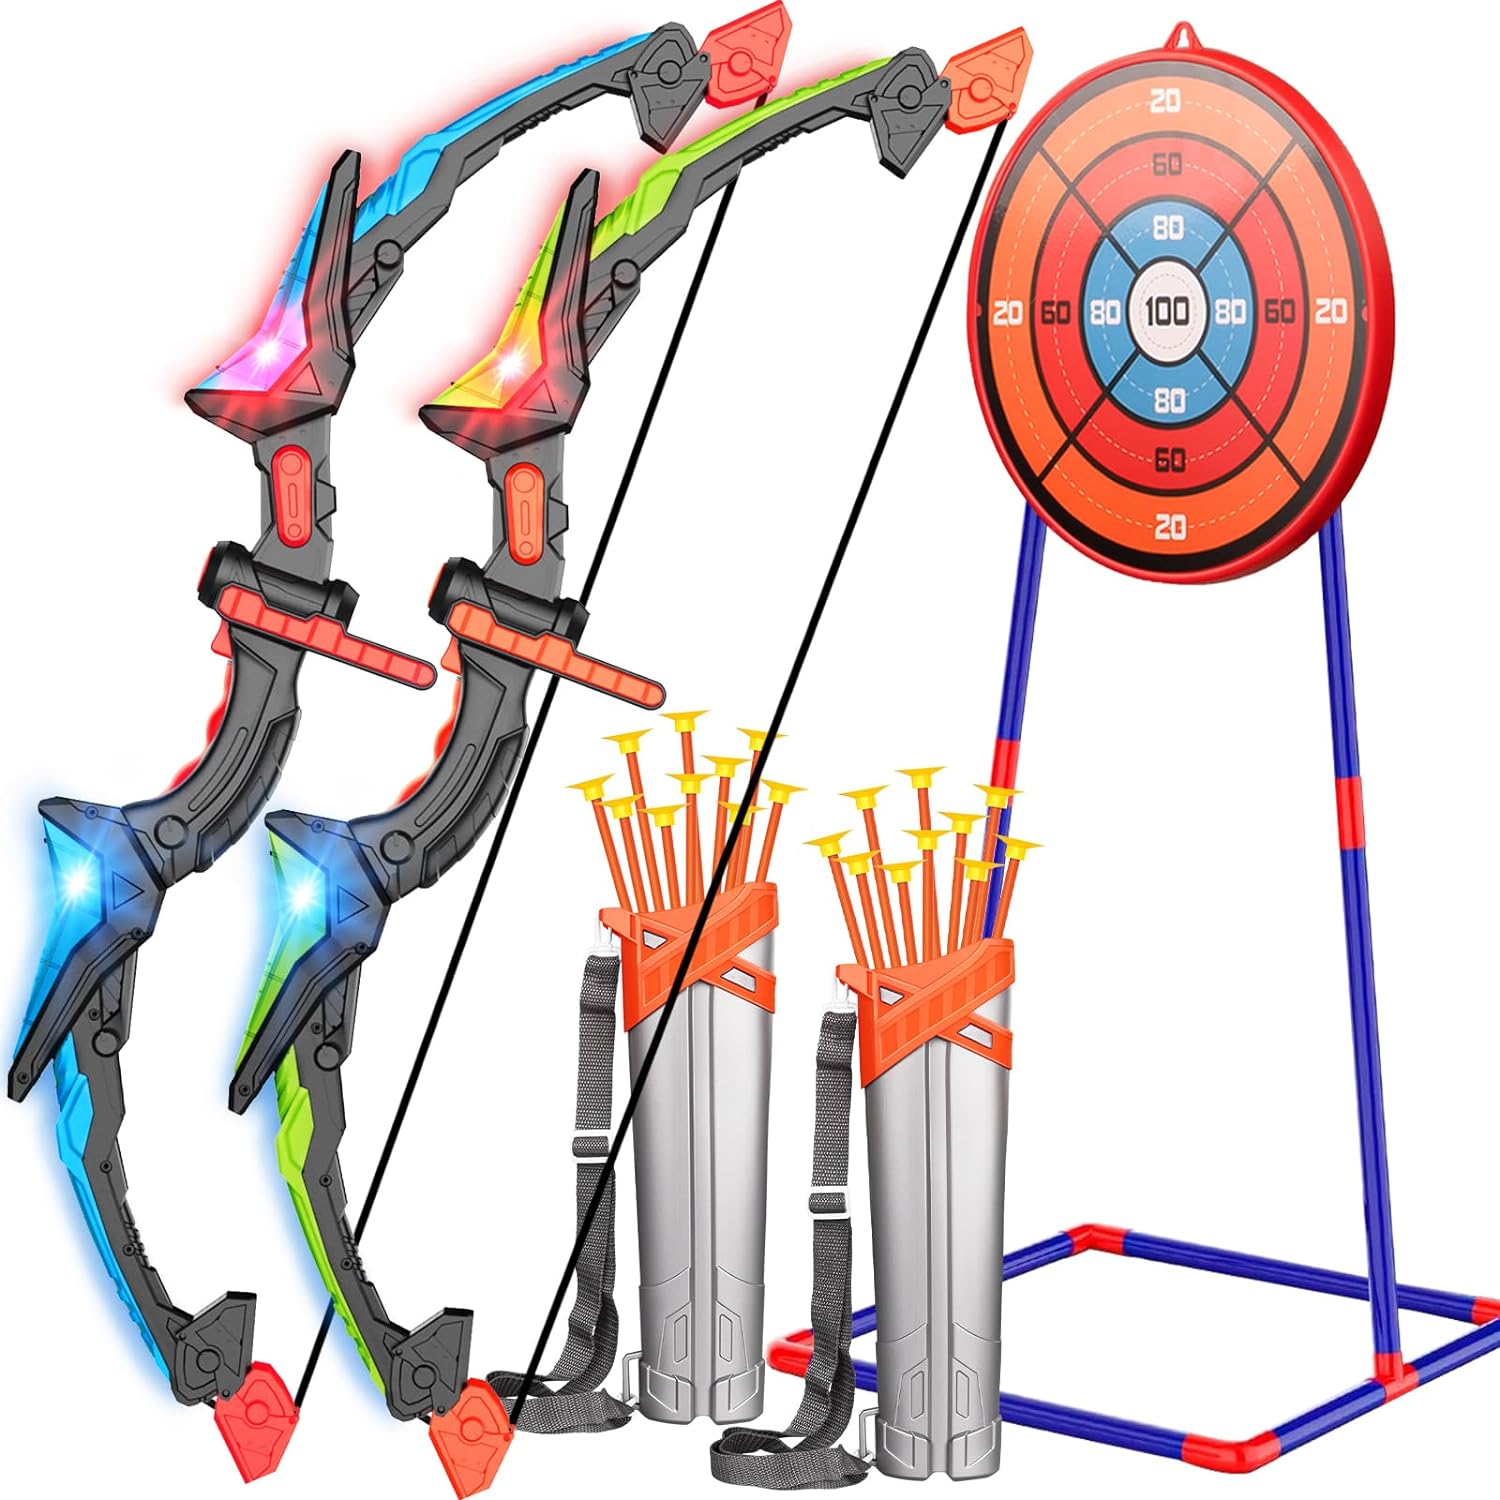 Bigdream Bow and Arrow Set for Kids, Bow and Arrow Toys for 5 6 7 8 9 10 11 12 13 14 Year Old Kids Boys Girls, 2 Pack LED Archery Set with Standing Target, Kids Indoor Outdoor Games Birthday Gifts